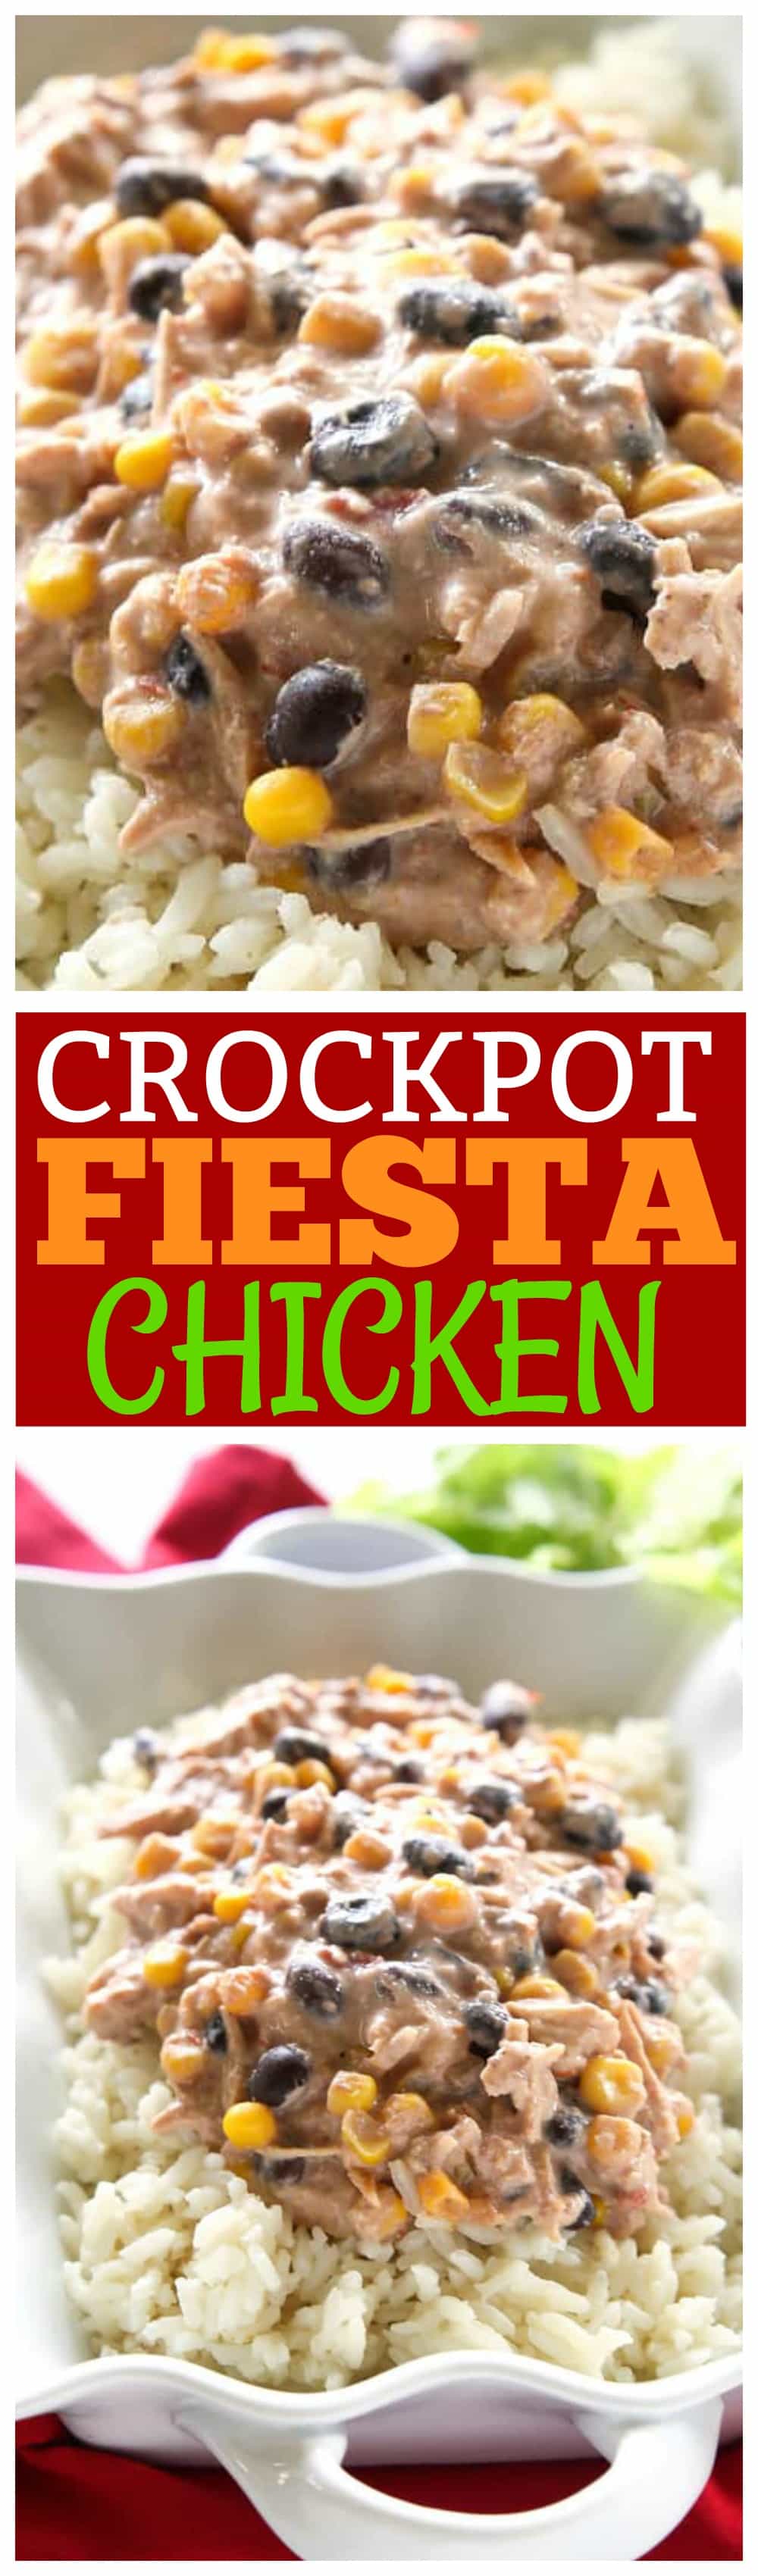 https://www.the-girl-who-ate-everything.com/wp-content/uploads/2010/05/easy-crockpot-fiesta-chicken.jpg